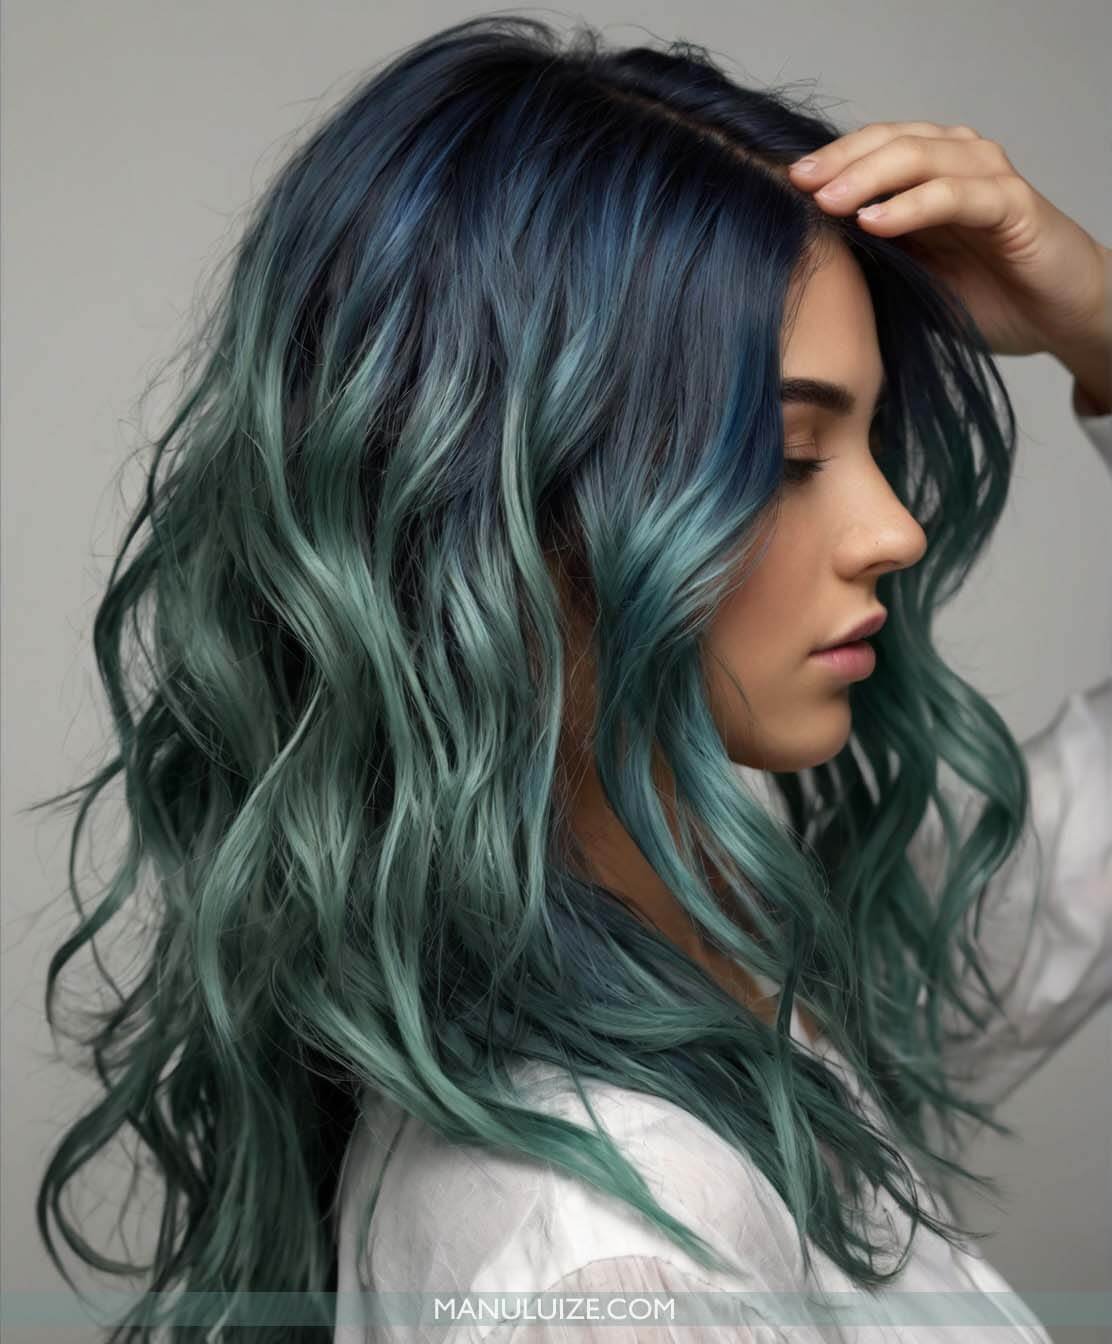 Blue and green hair color